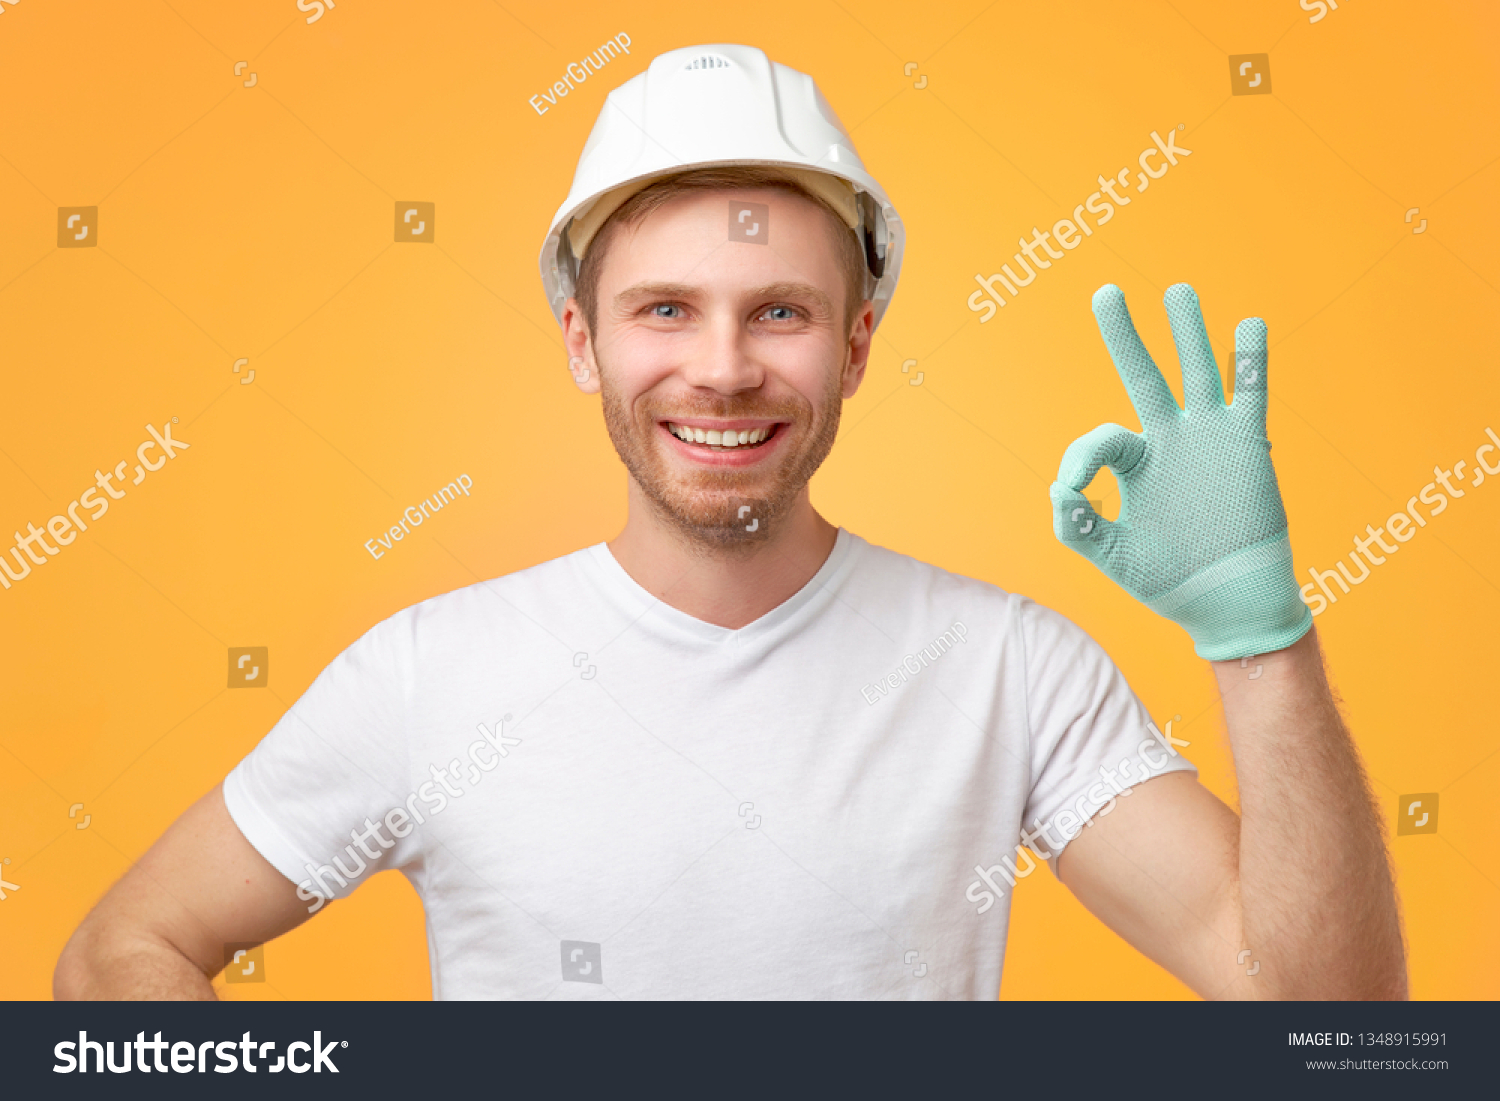 Pleased confident European man with broad smile, uniform, shows okay gesture, dressed in t-shirt and construction helmet. Isolated over white background.  #1348915991